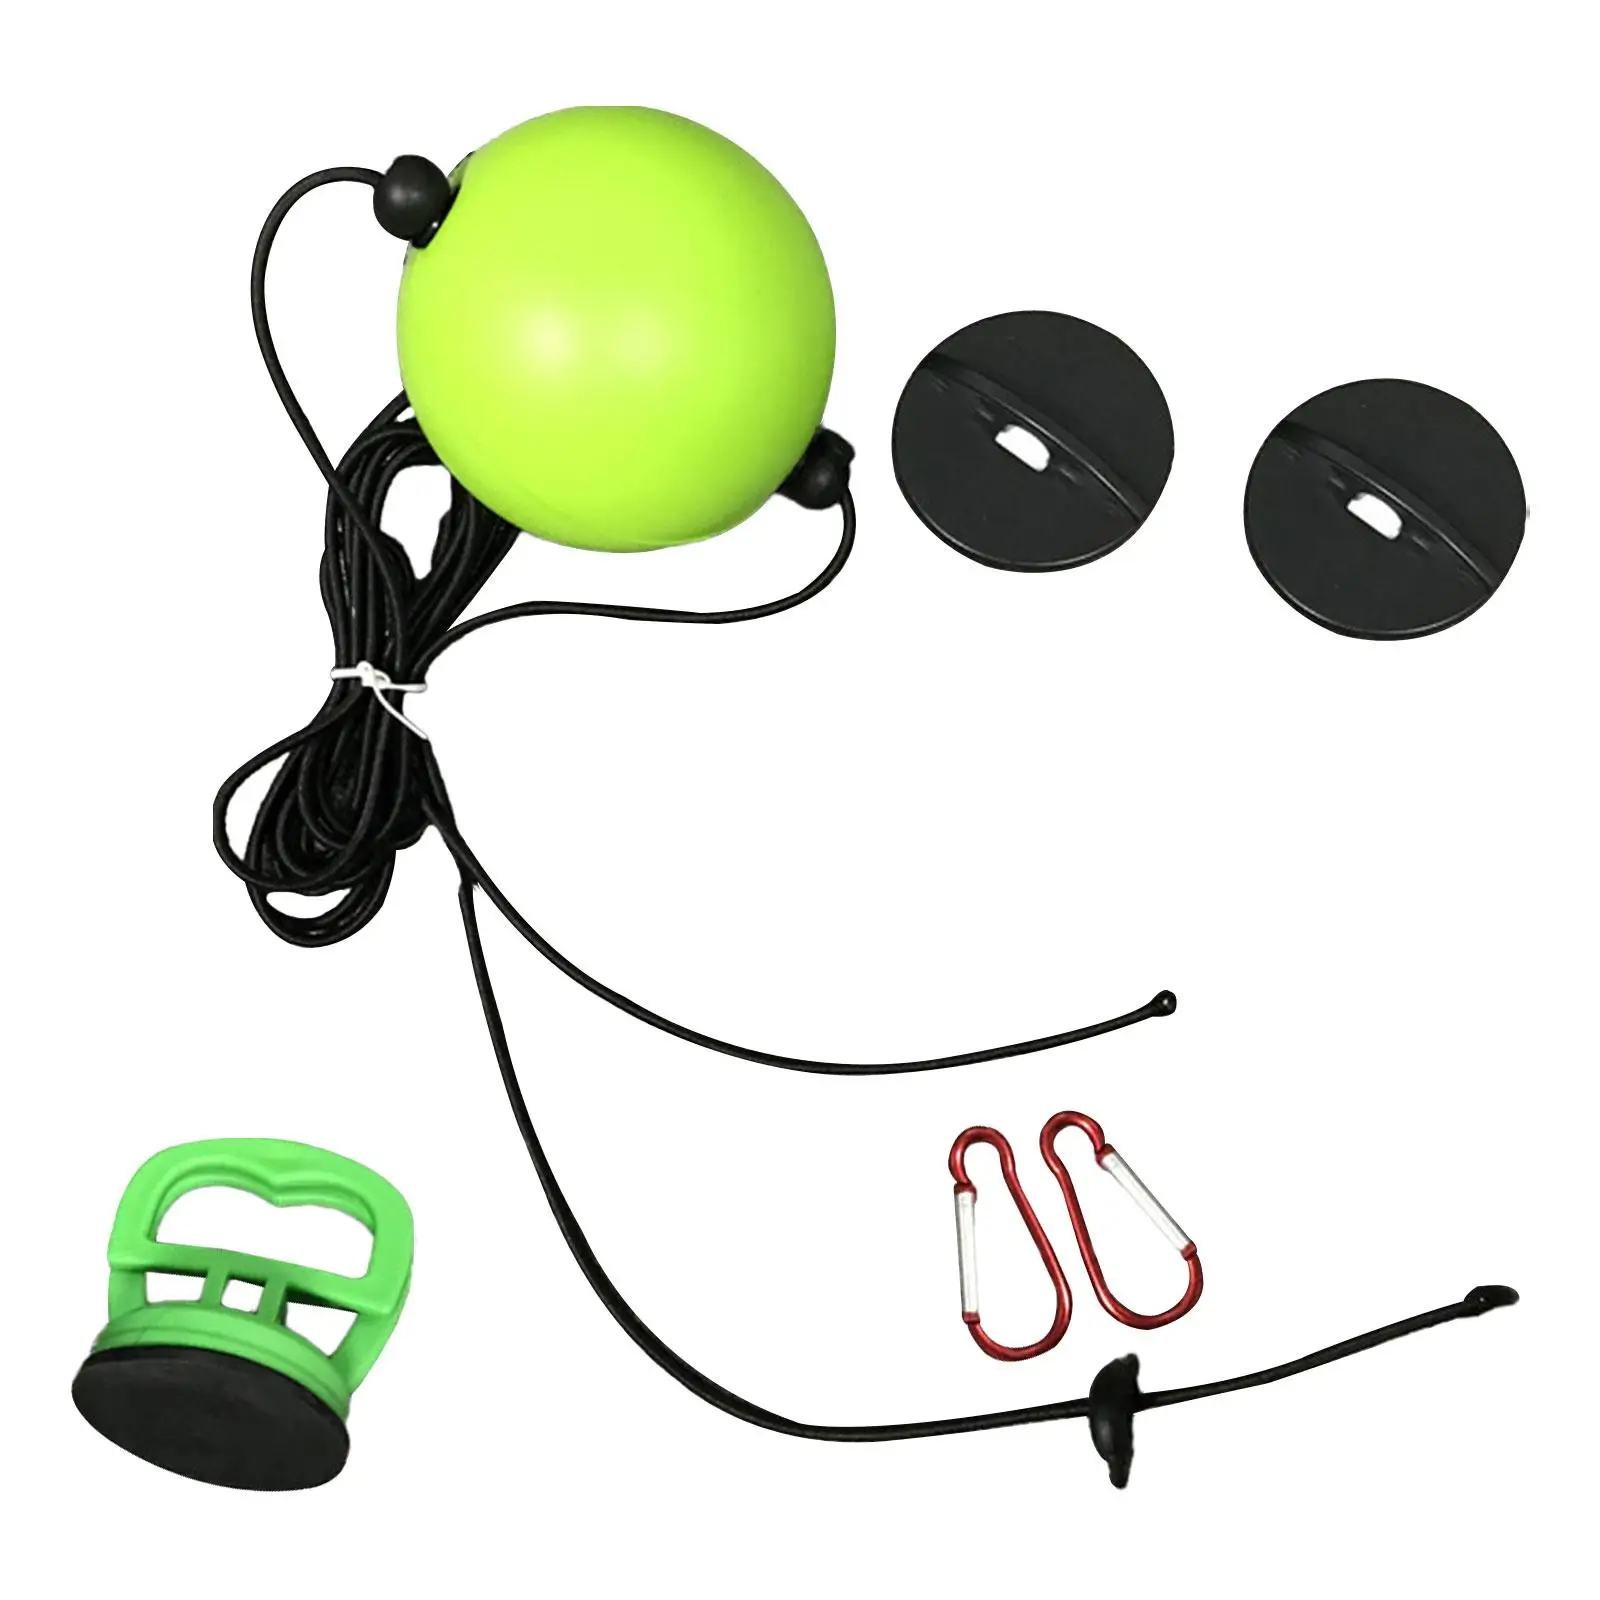 Boxing Reaction Ball Reflex Speed Ball Sports Workout Fitness Equipment, Double End Punching Ball for Hand Eye Coordination